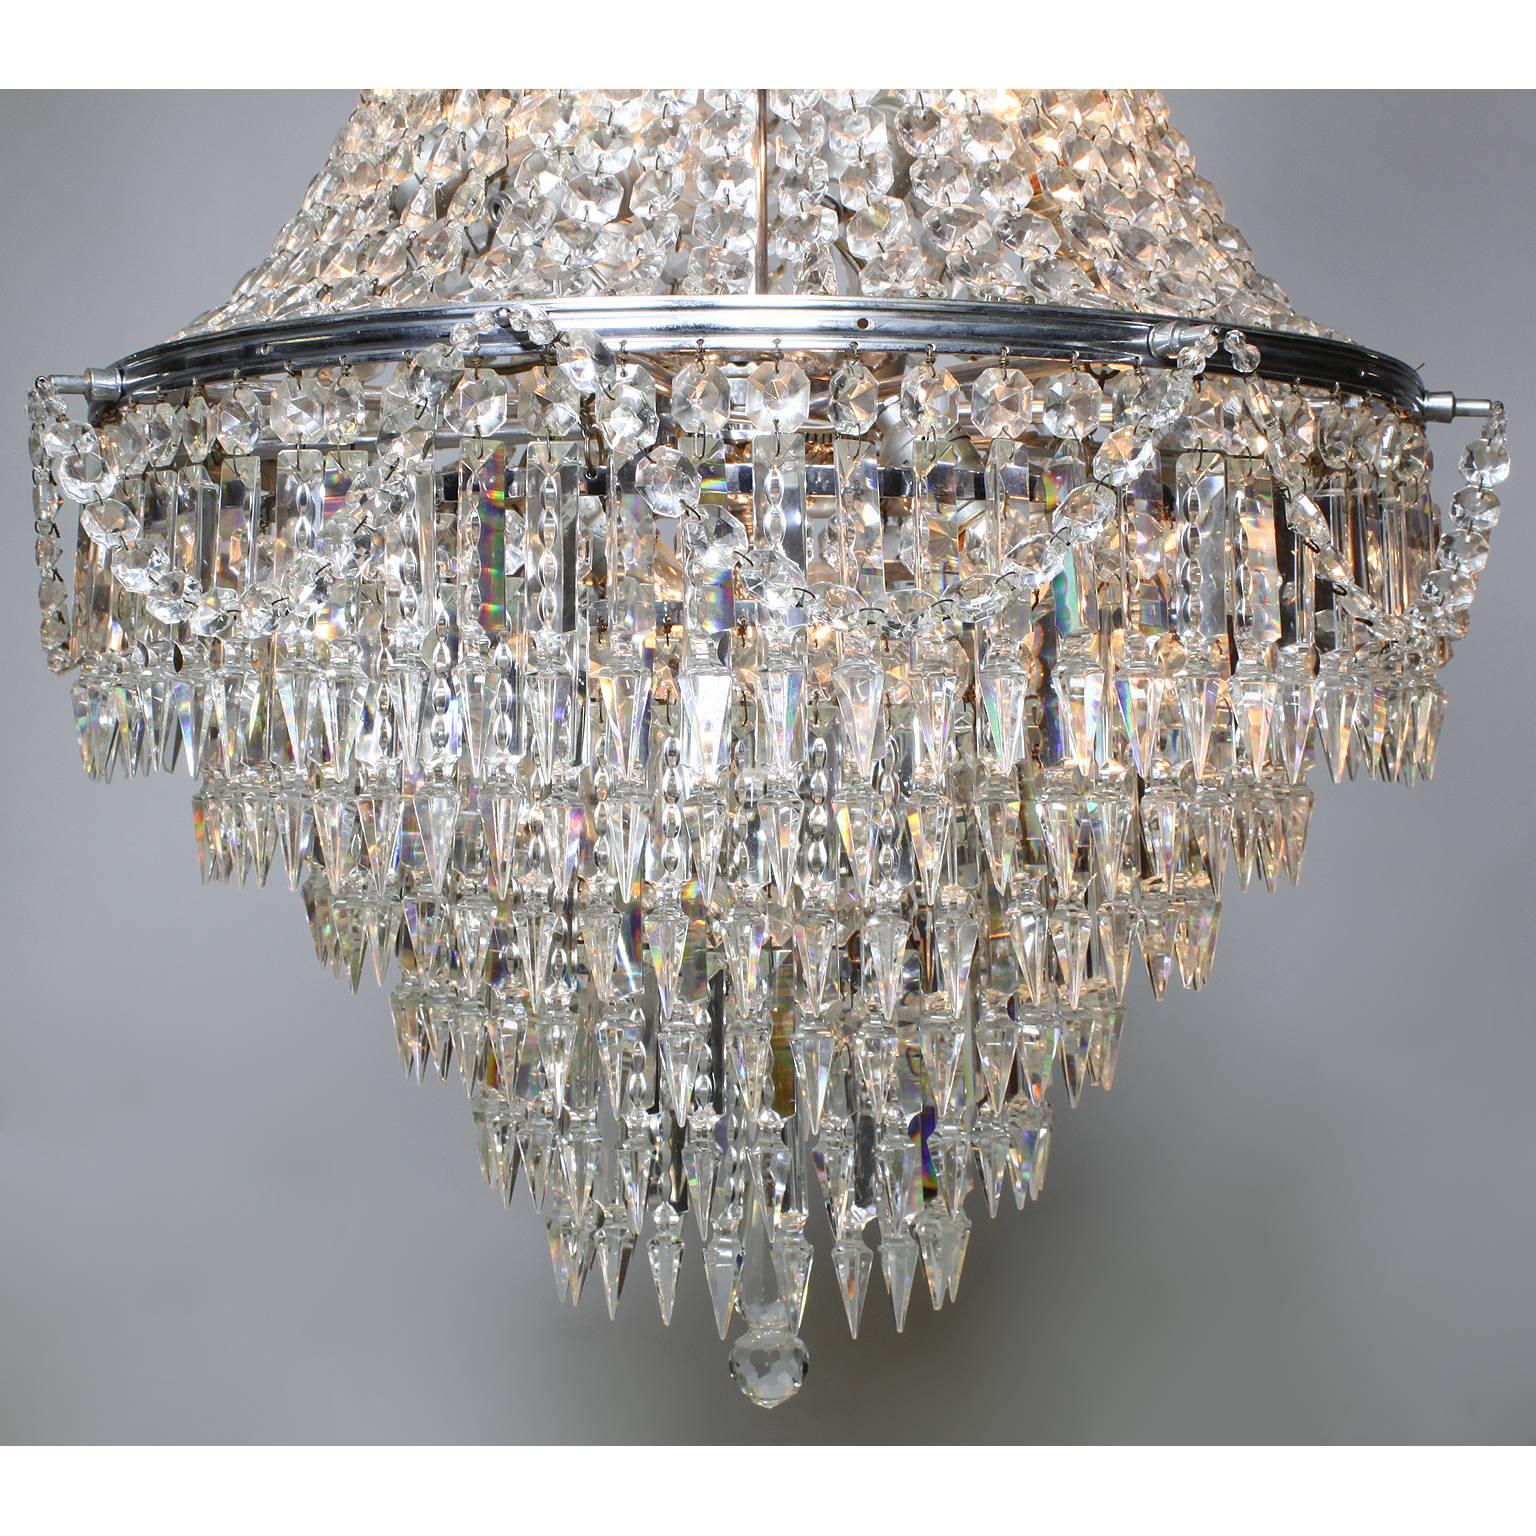 Silvered French Belle Epoque 19th-20th Century Cut-Glass Chandelier, Baccarat Attributed For Sale